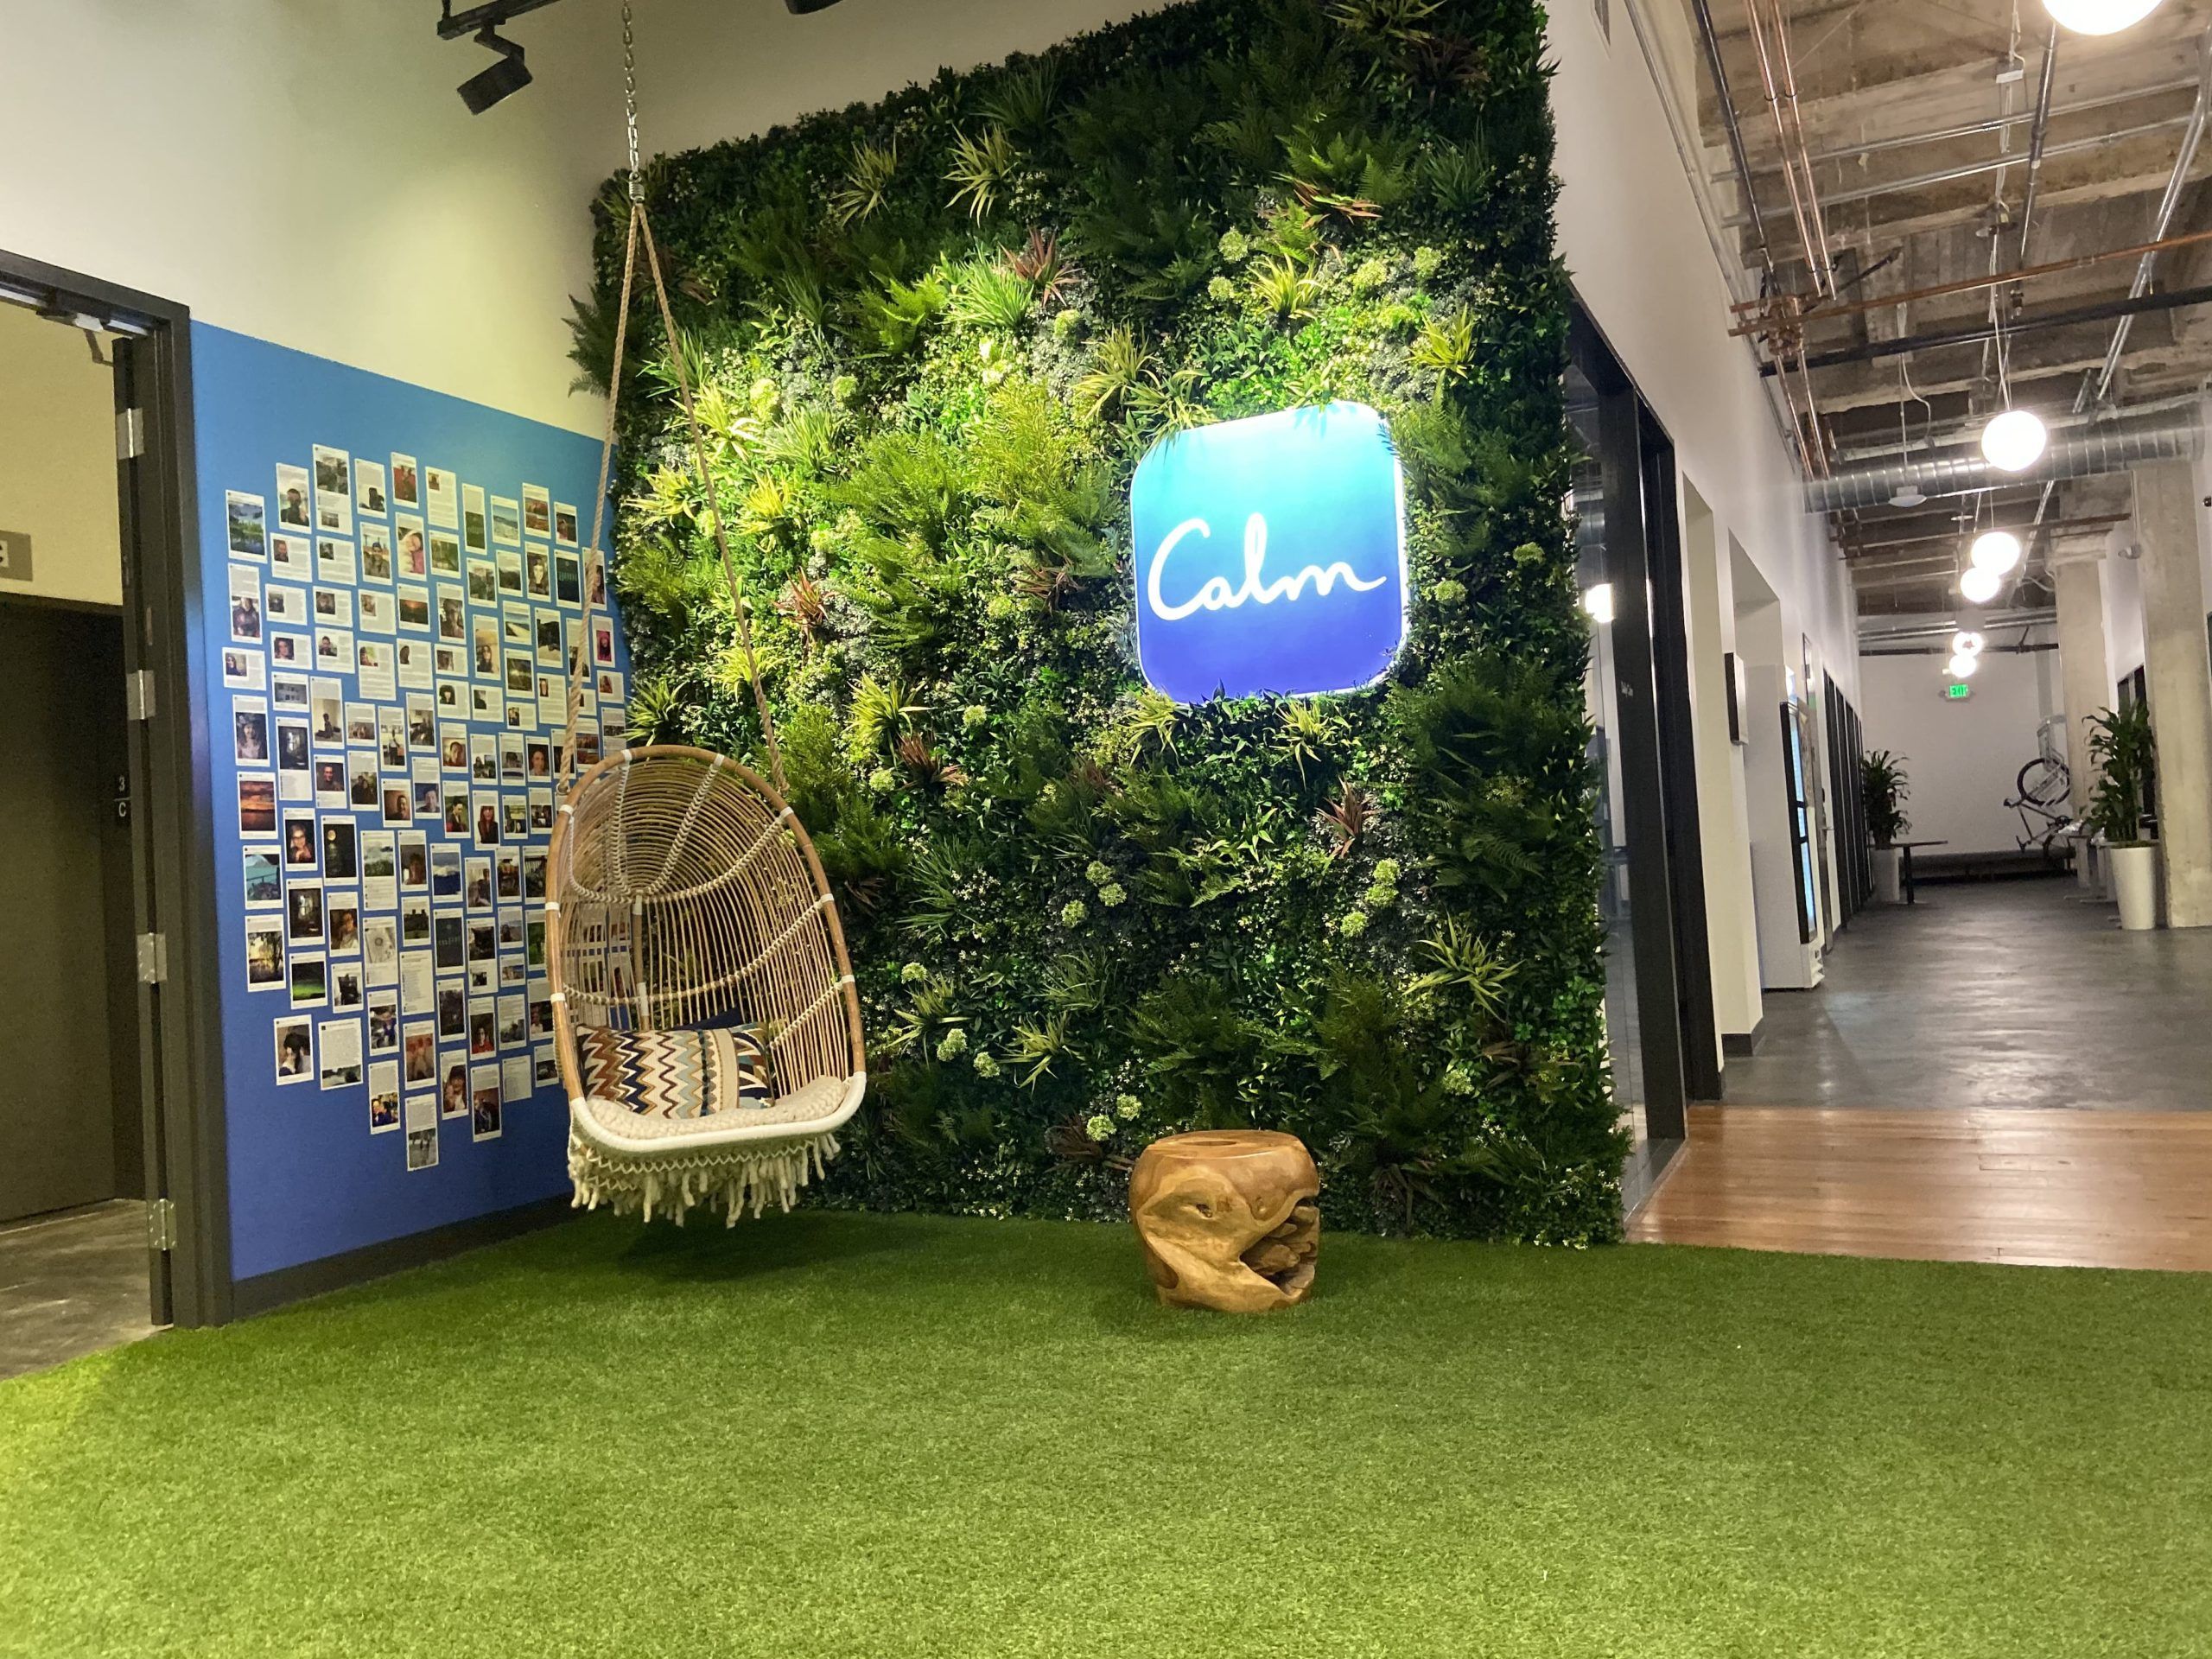 Calm Office Headquarters In San Francisco, California – Vistafolia The Home  Of Artificial Living Walls With Regard To Most Recent California Living Wall Art (View 10 of 20)